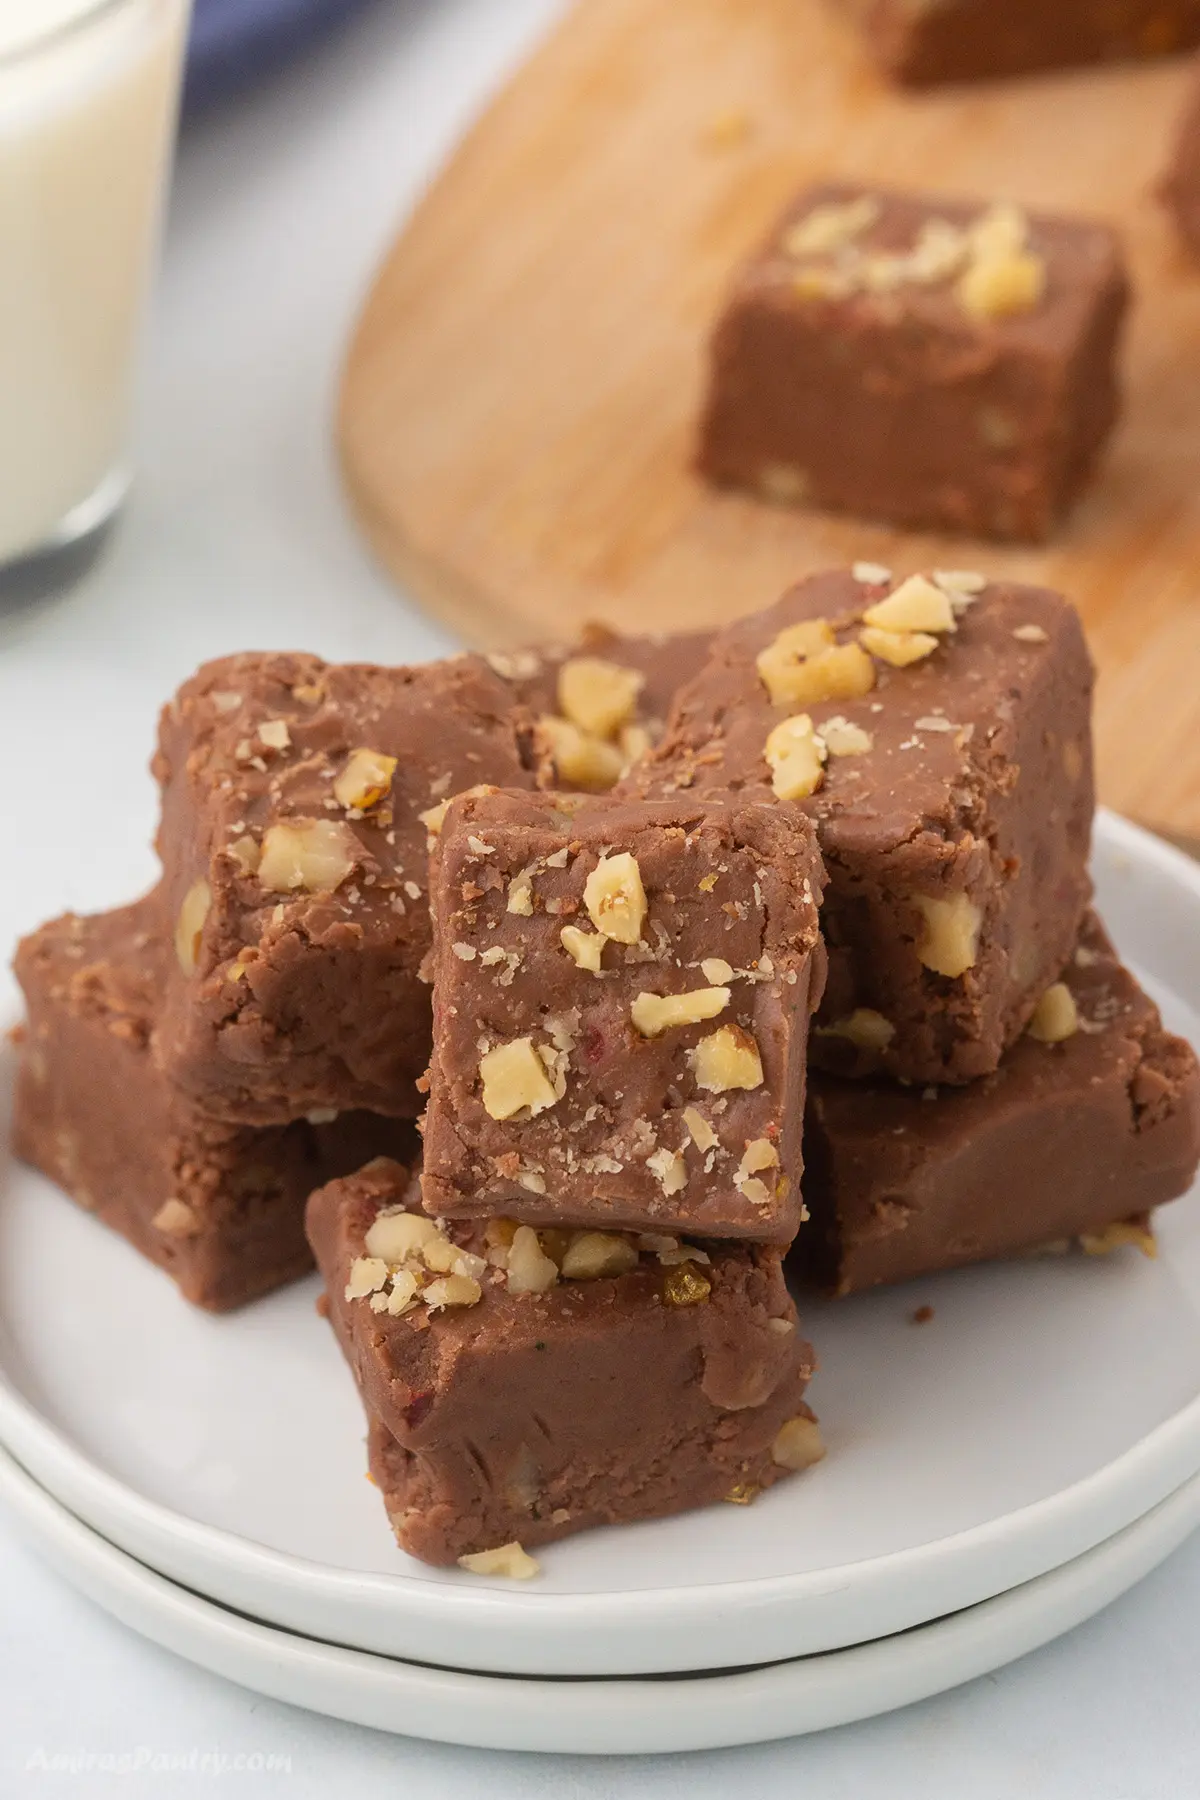 Fudge garnished with walnuts on small white plates.